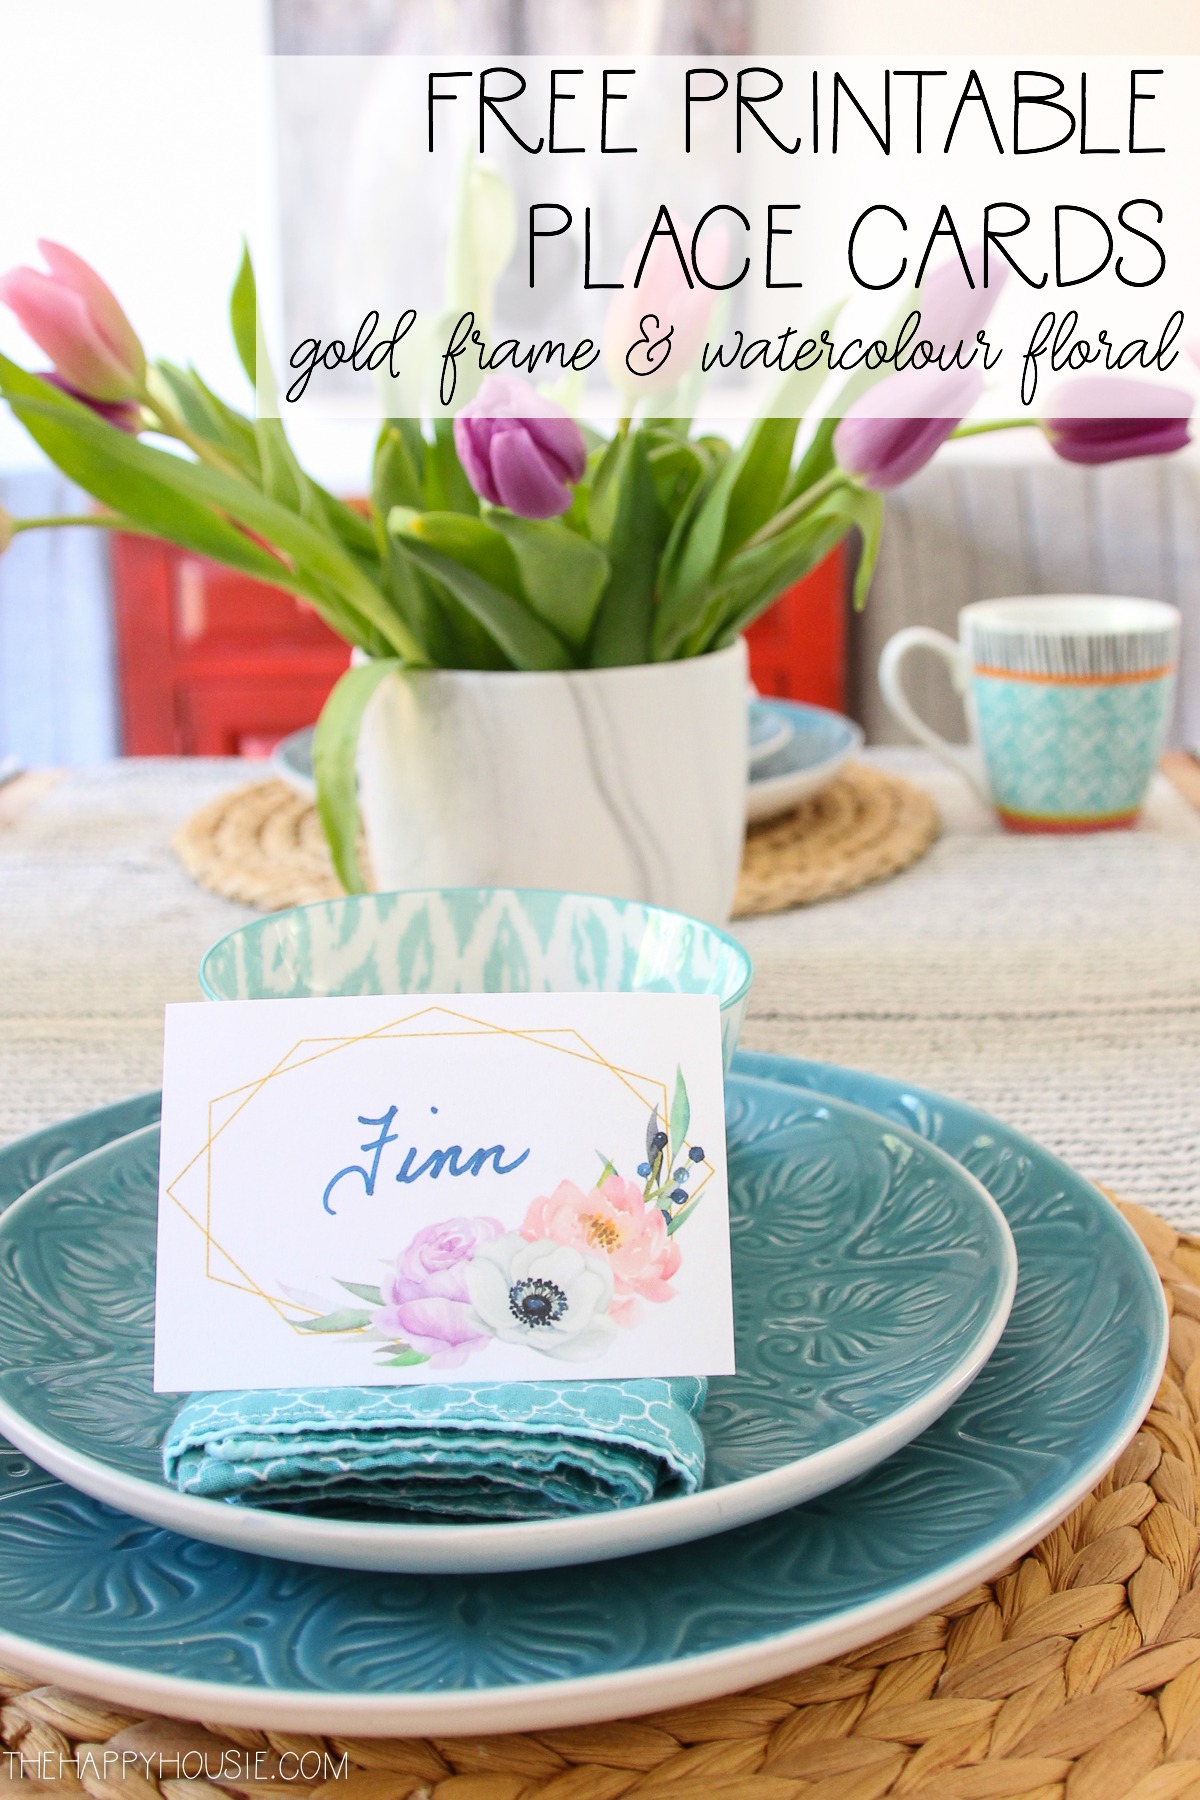 Free Printable Place Cards graphic.